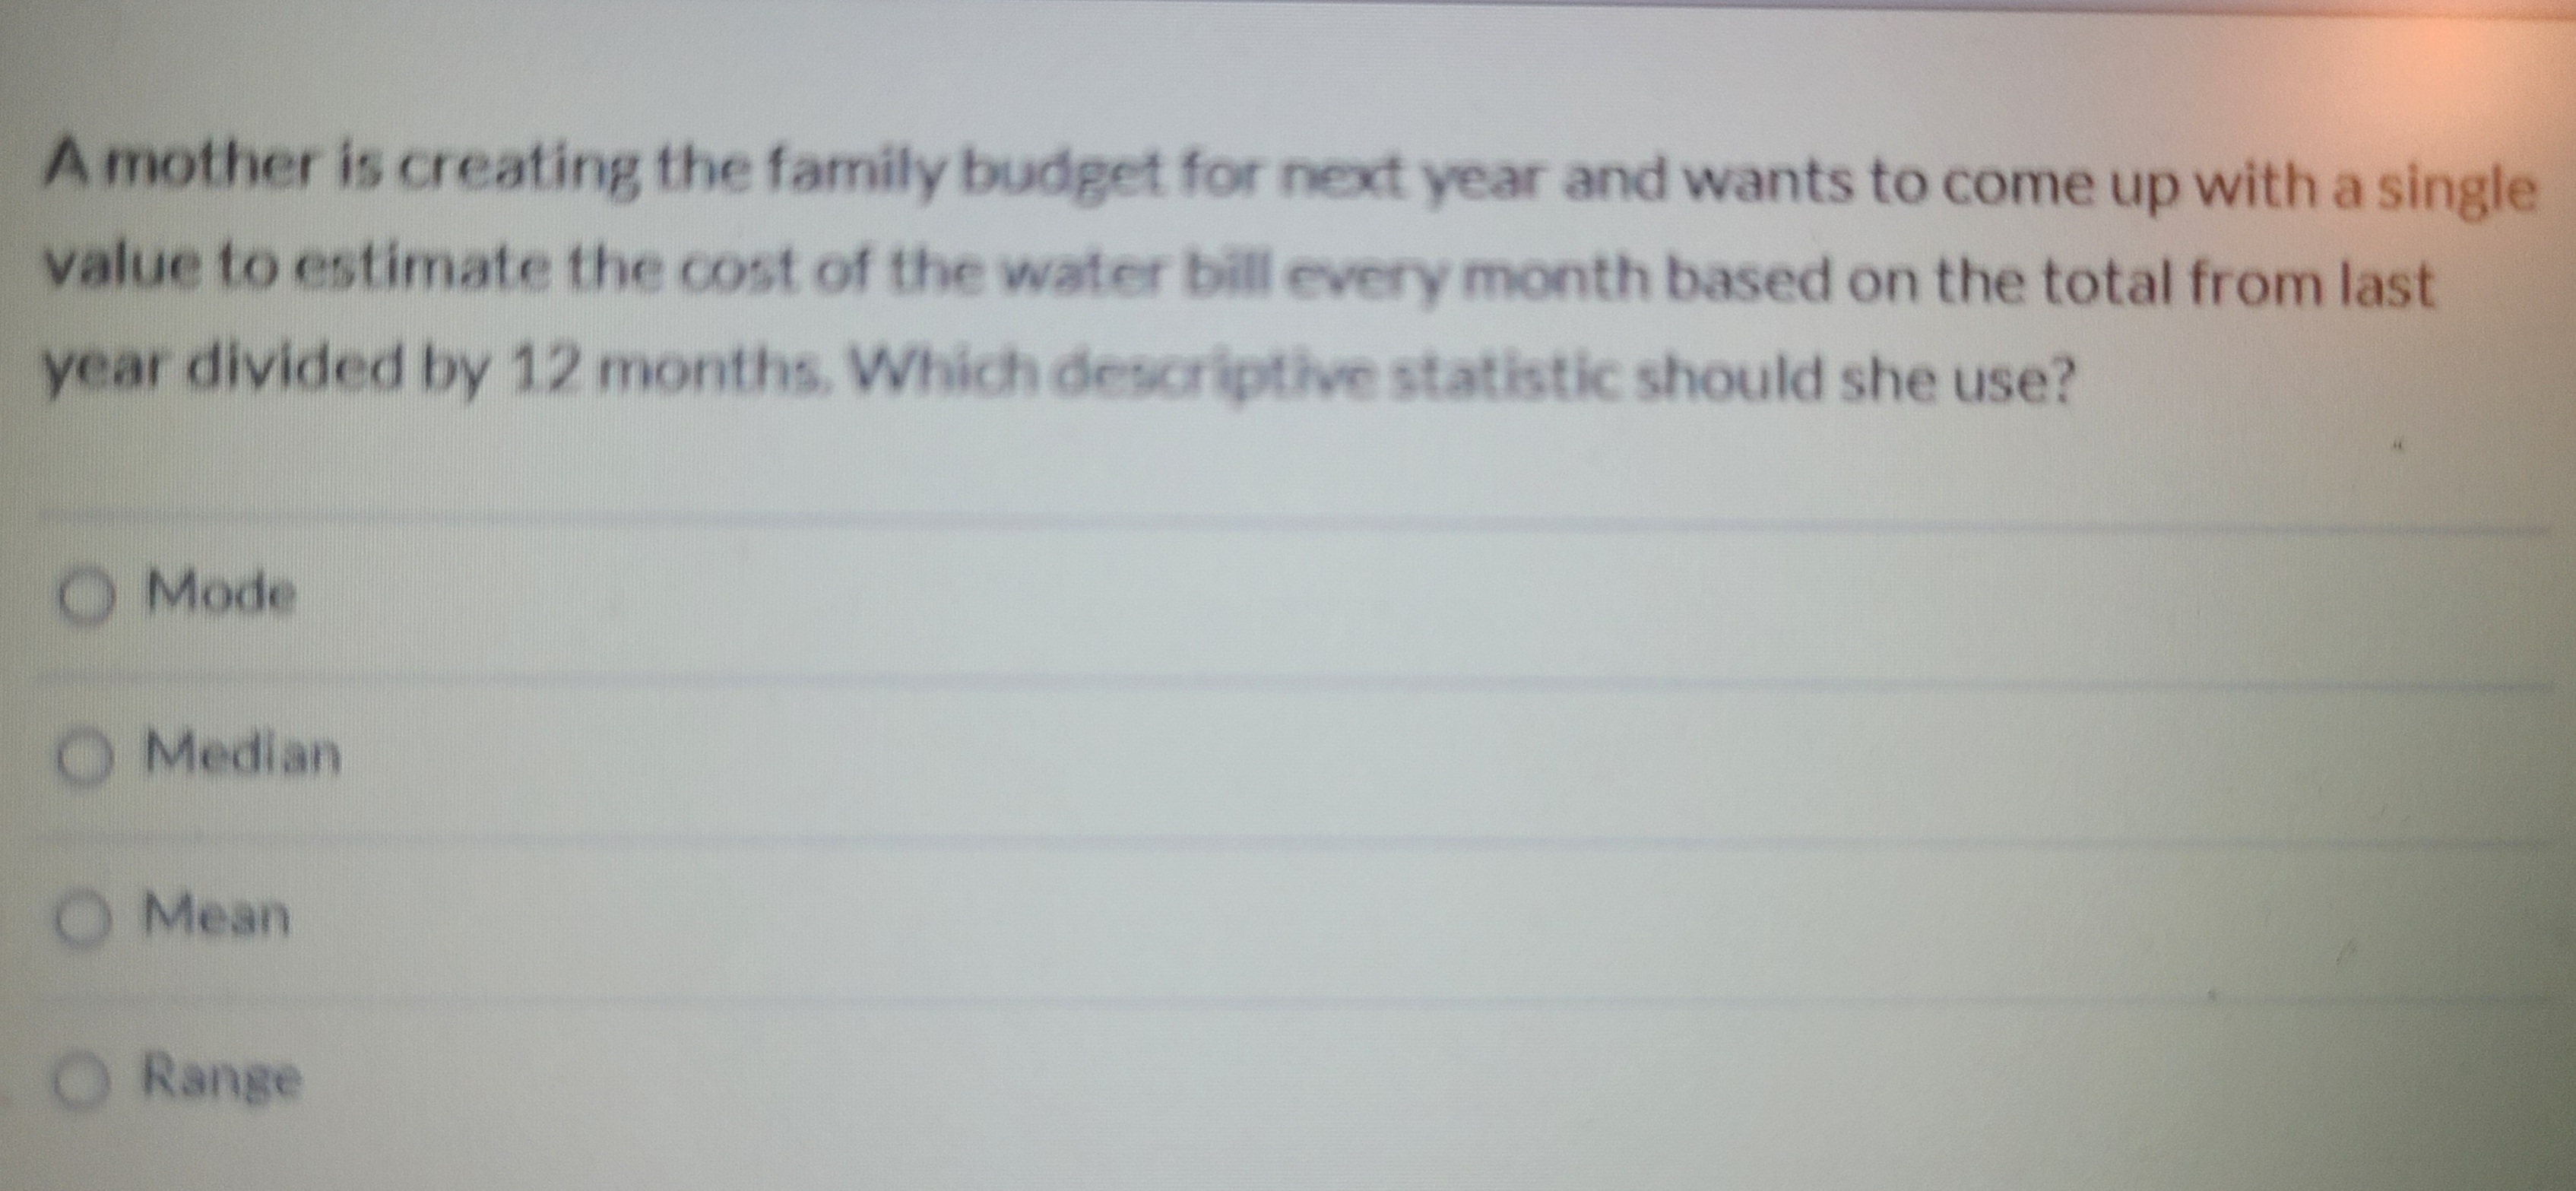 A mother is creating the family budget for next year and wants to come up with a single
value to estimate the cost of the water bill every month based on the total from last
year divided by 12 months. Which descriptive statistic should she use?
O Mode
O Median
O Mean
